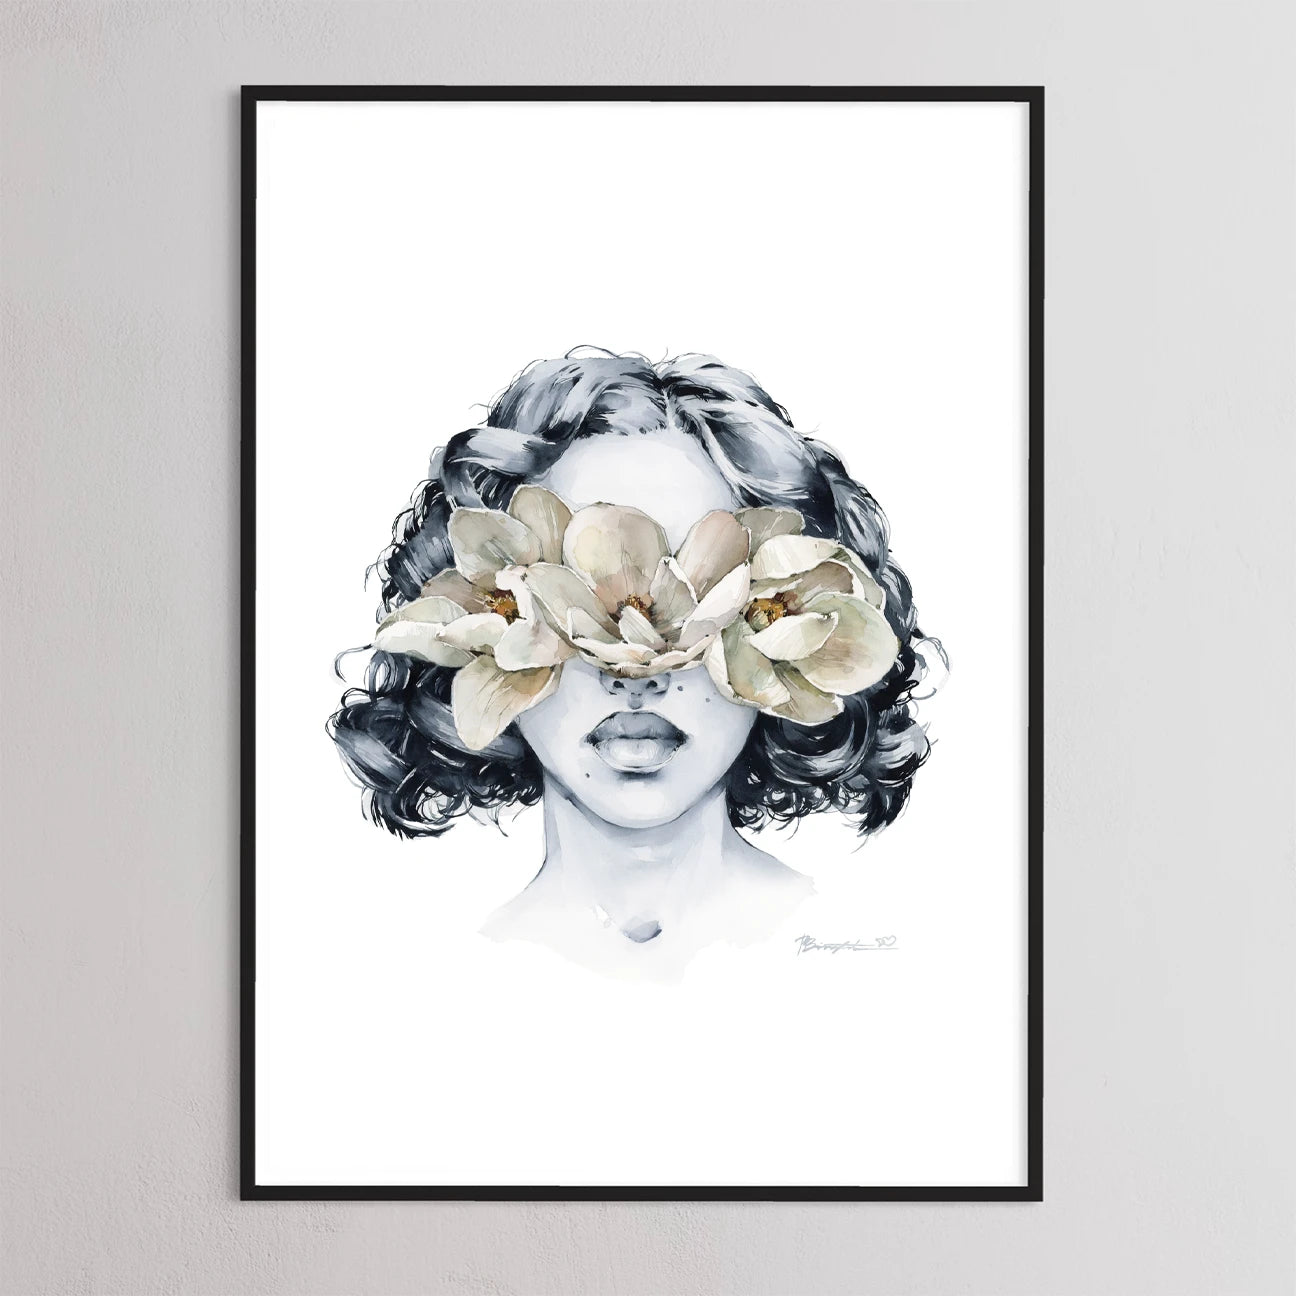 Blindfolded - Blindfold - Posters and Art Prints